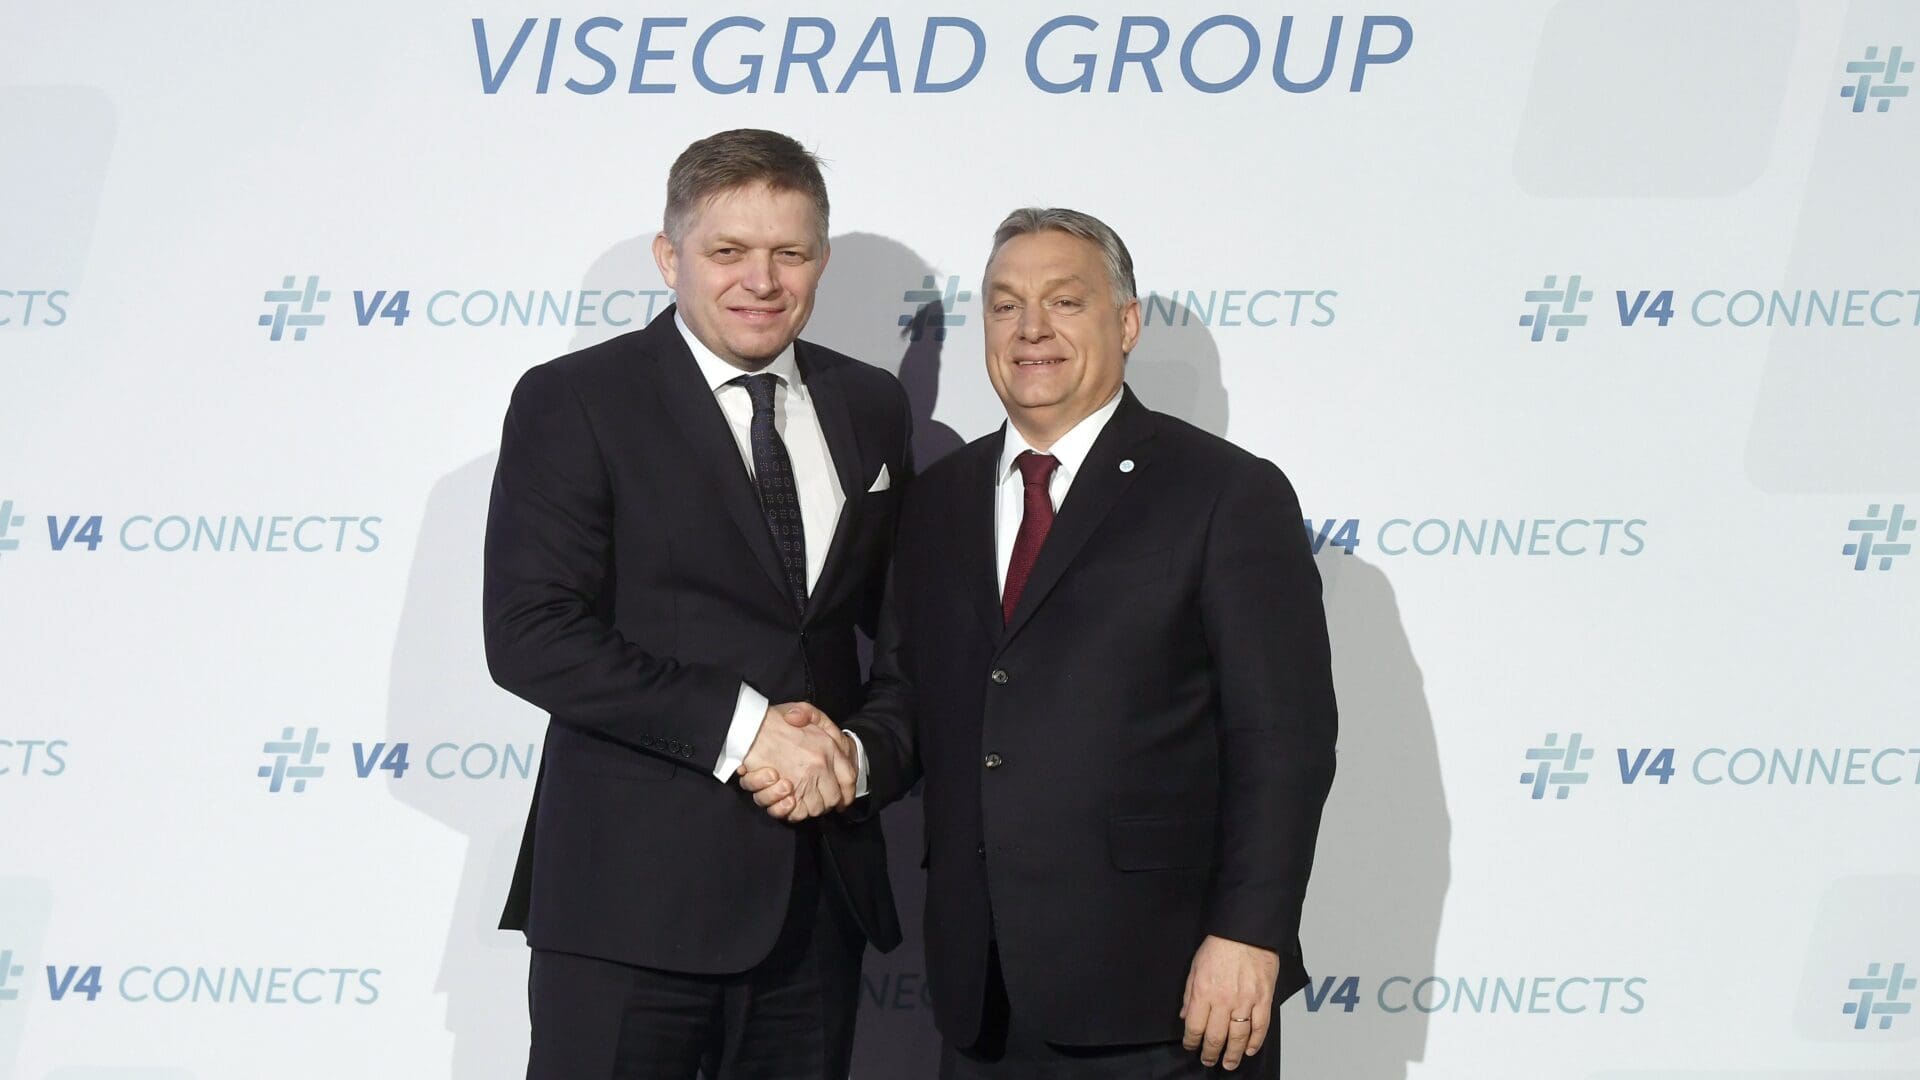 Robert Fico and Viktor Orbán (R) on 26 January 2018 in Budapest.